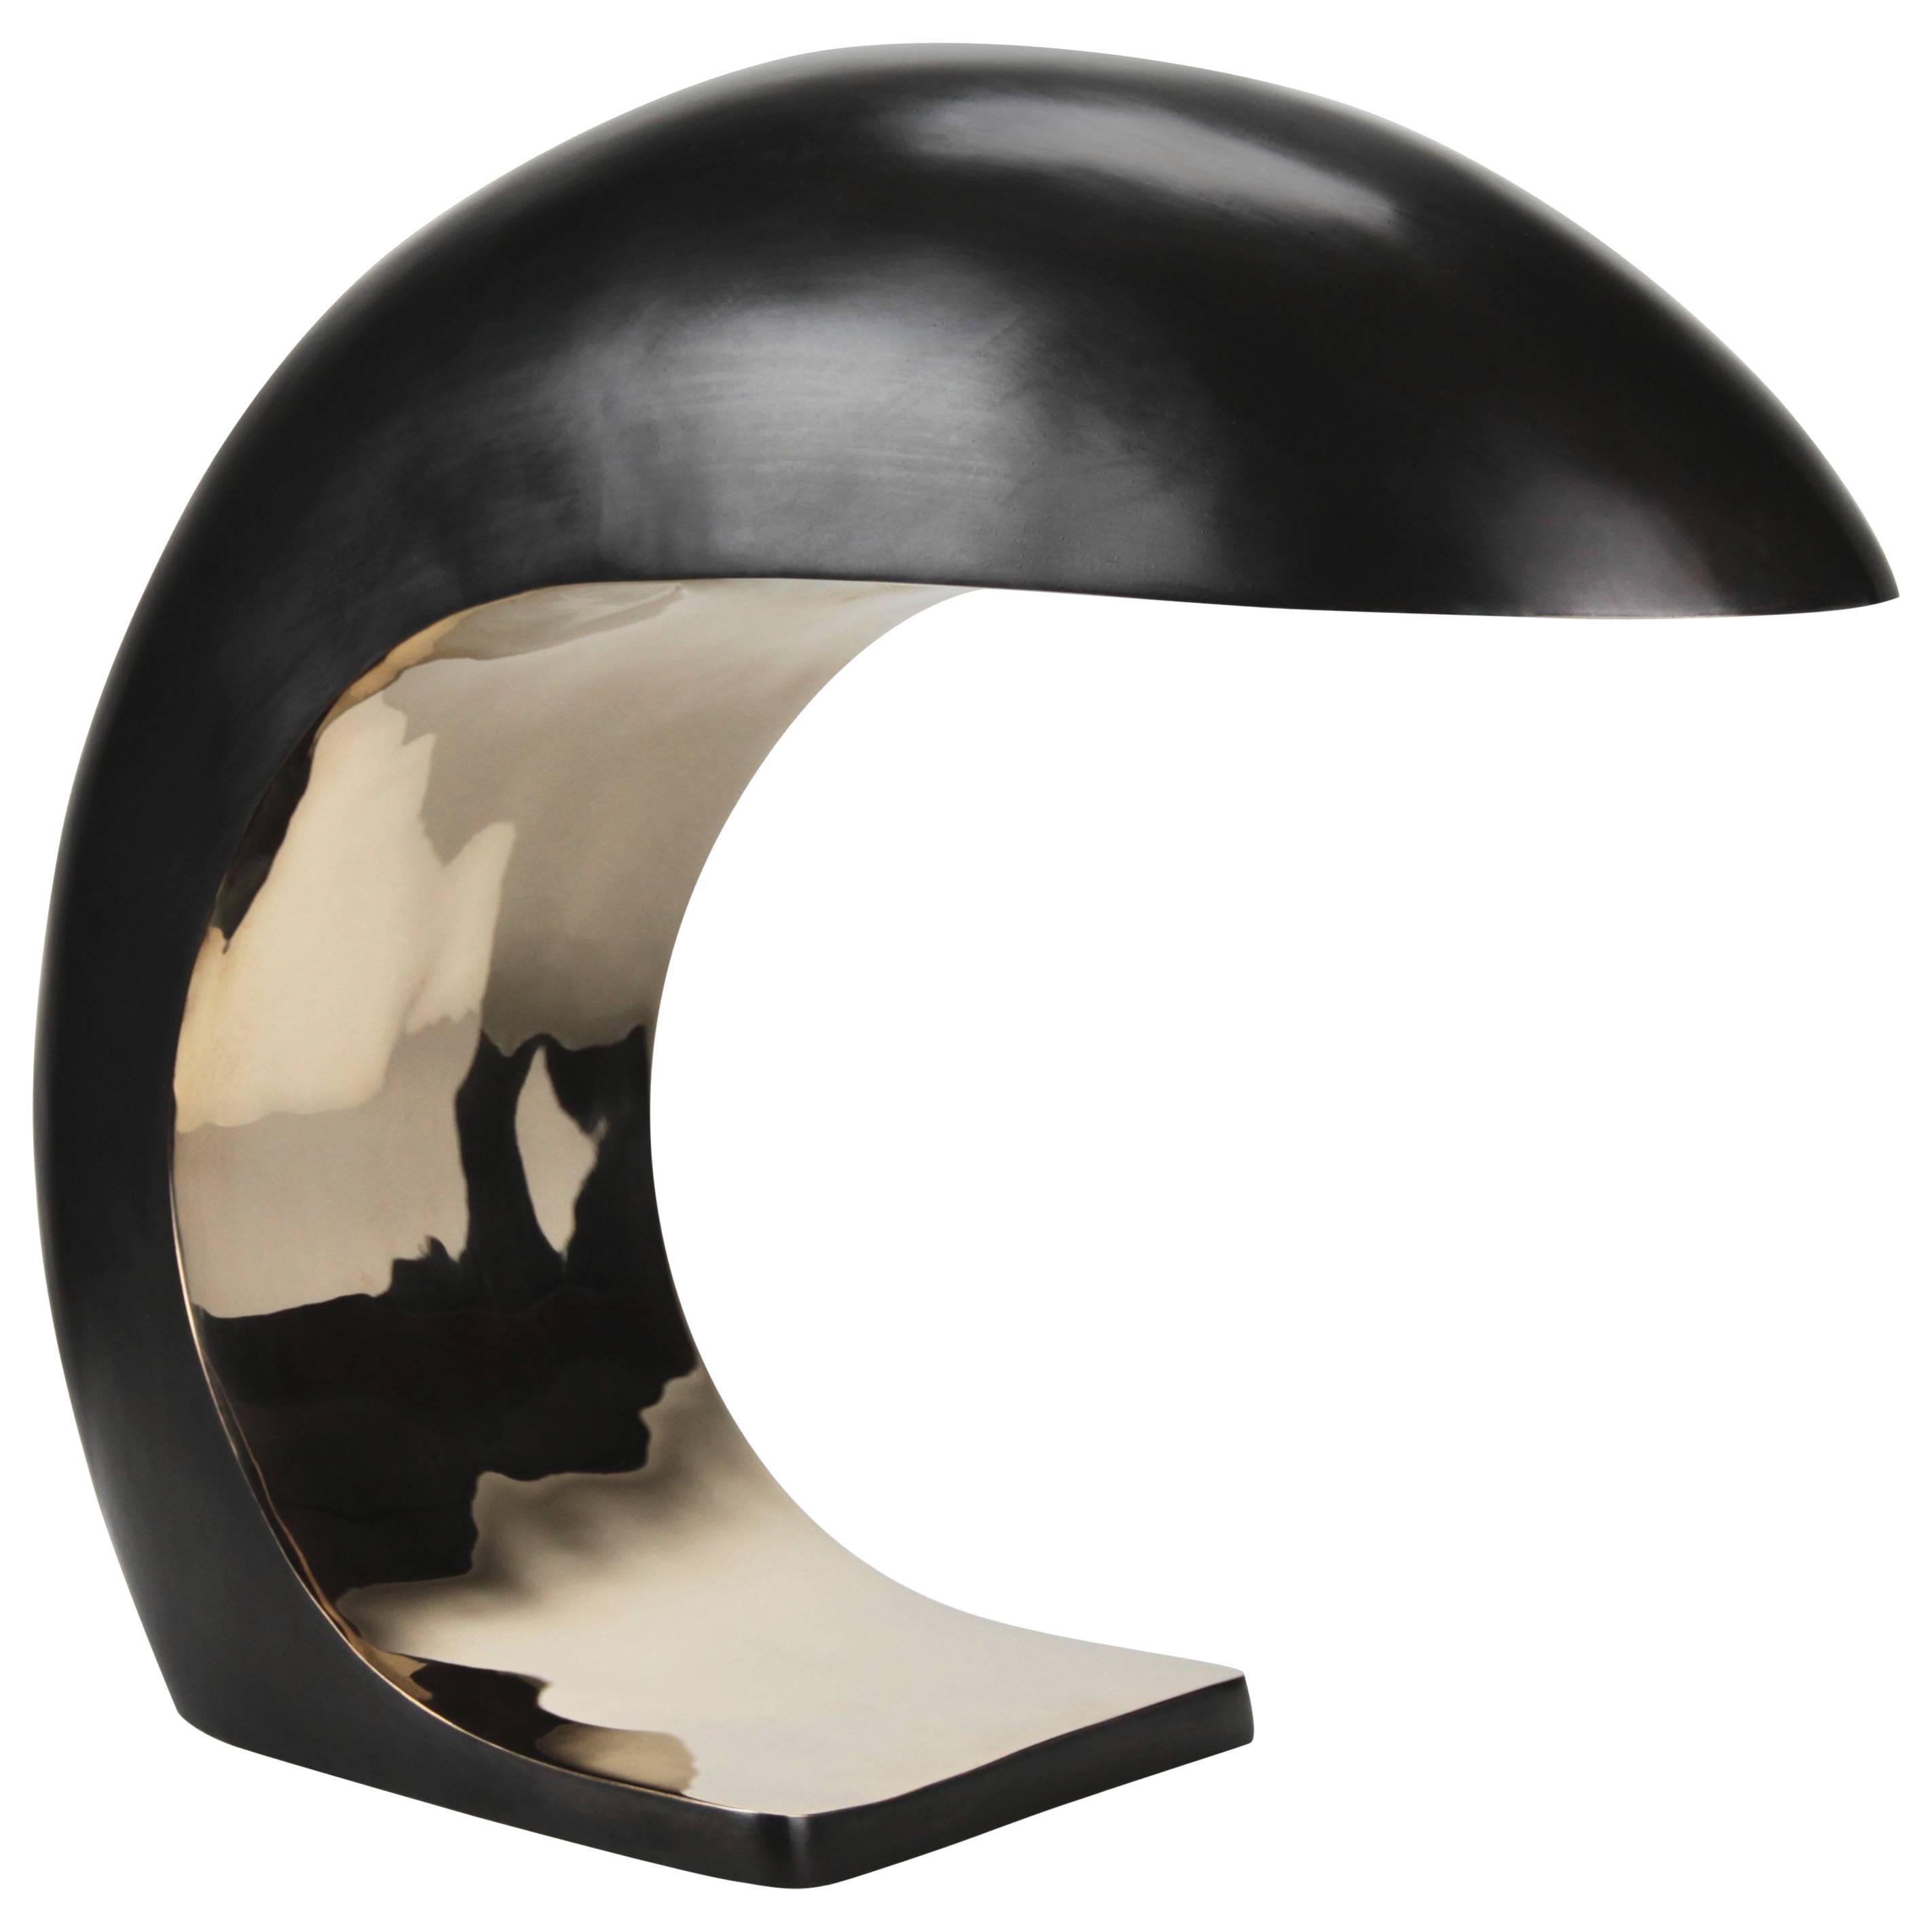 The Nautilus lamp in lamp is inspired by midcentury Italian design.
It is cast bronze and weighs up to 28 to 30 lbs. The outer shell has a blackened patina and the face is high polished to a mirrored finish and waxed.
 
The Nautilus illuminates